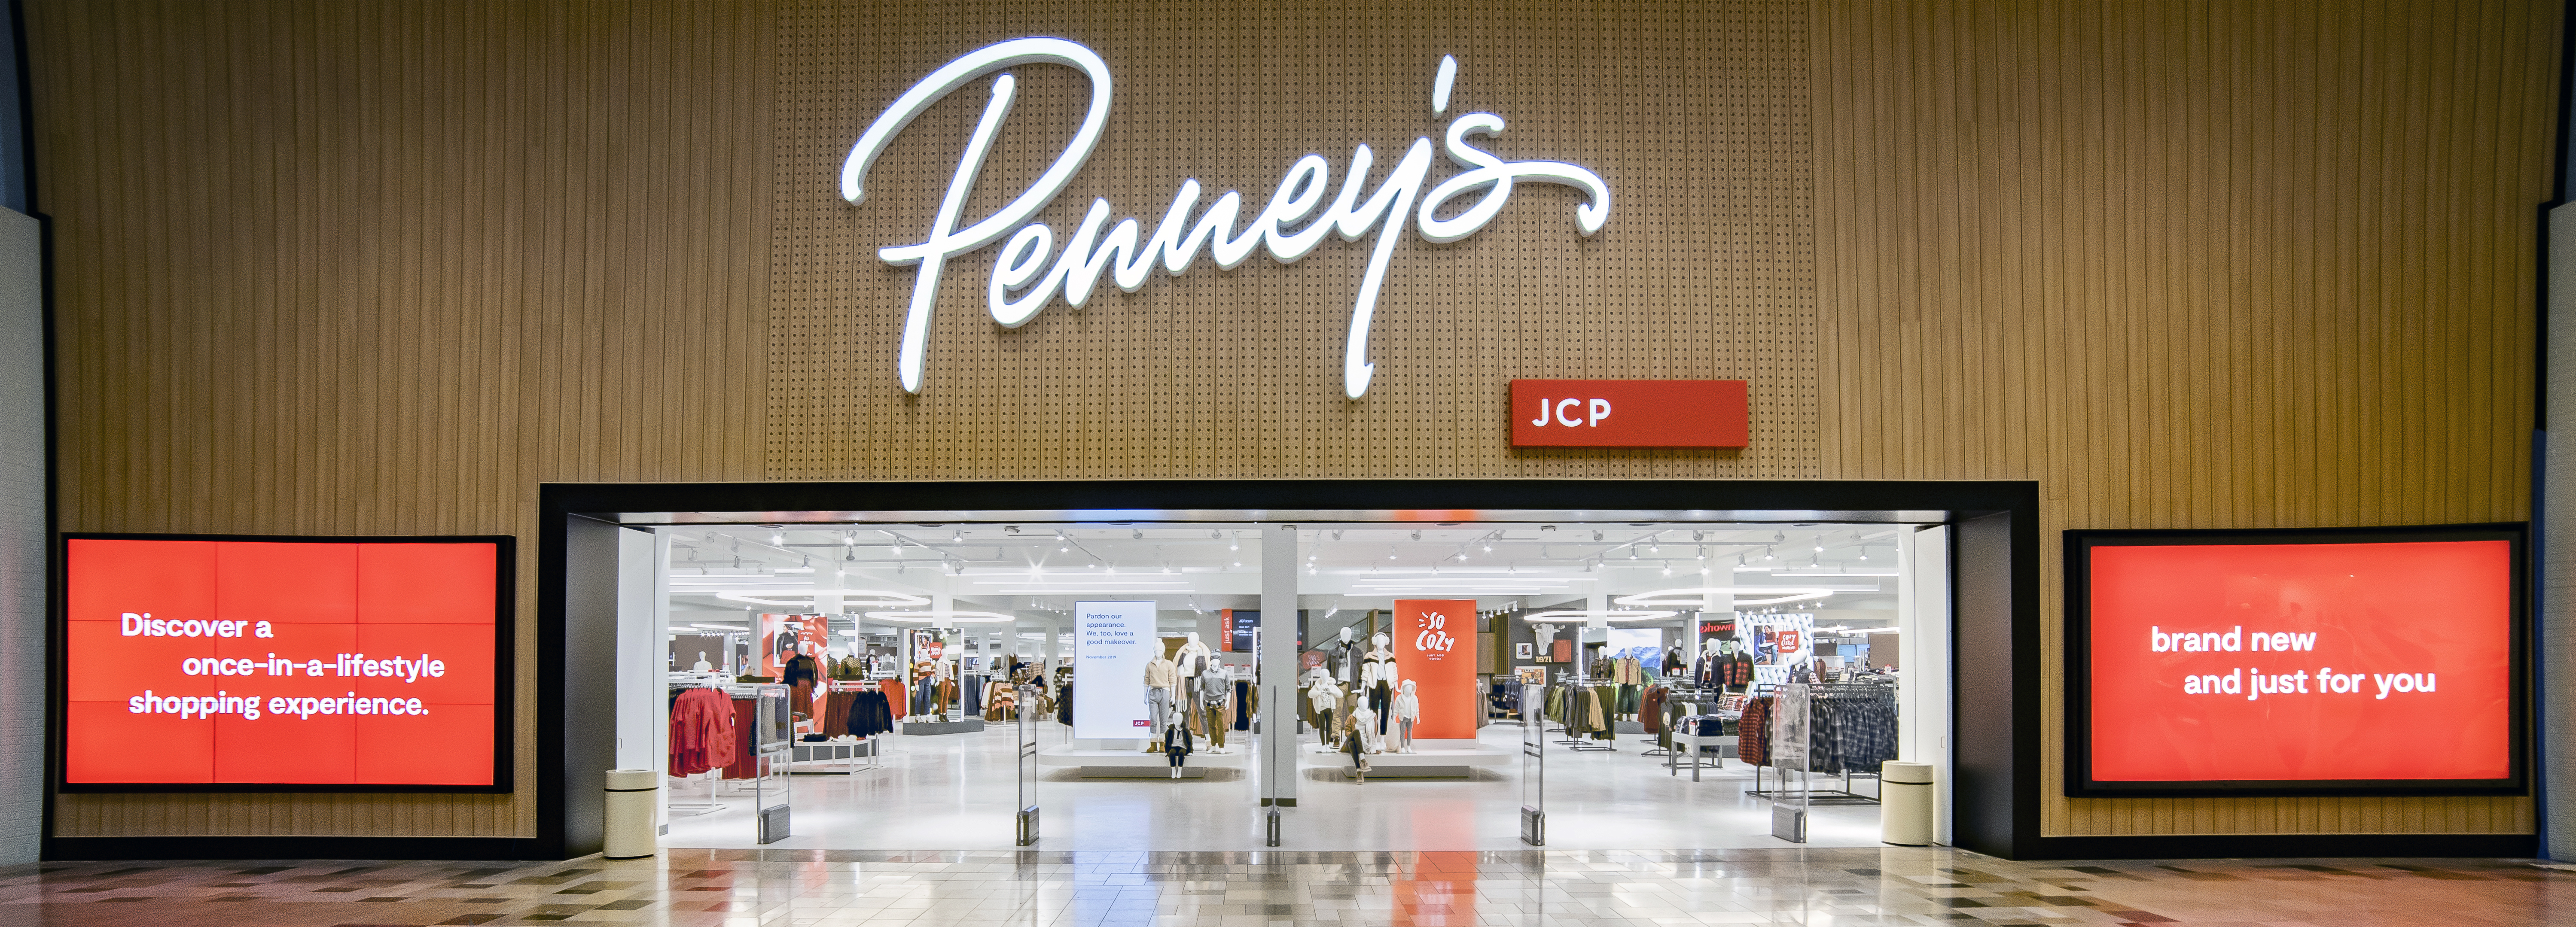 Sell to JcPenney Stores & Become a JcPenney Vendor